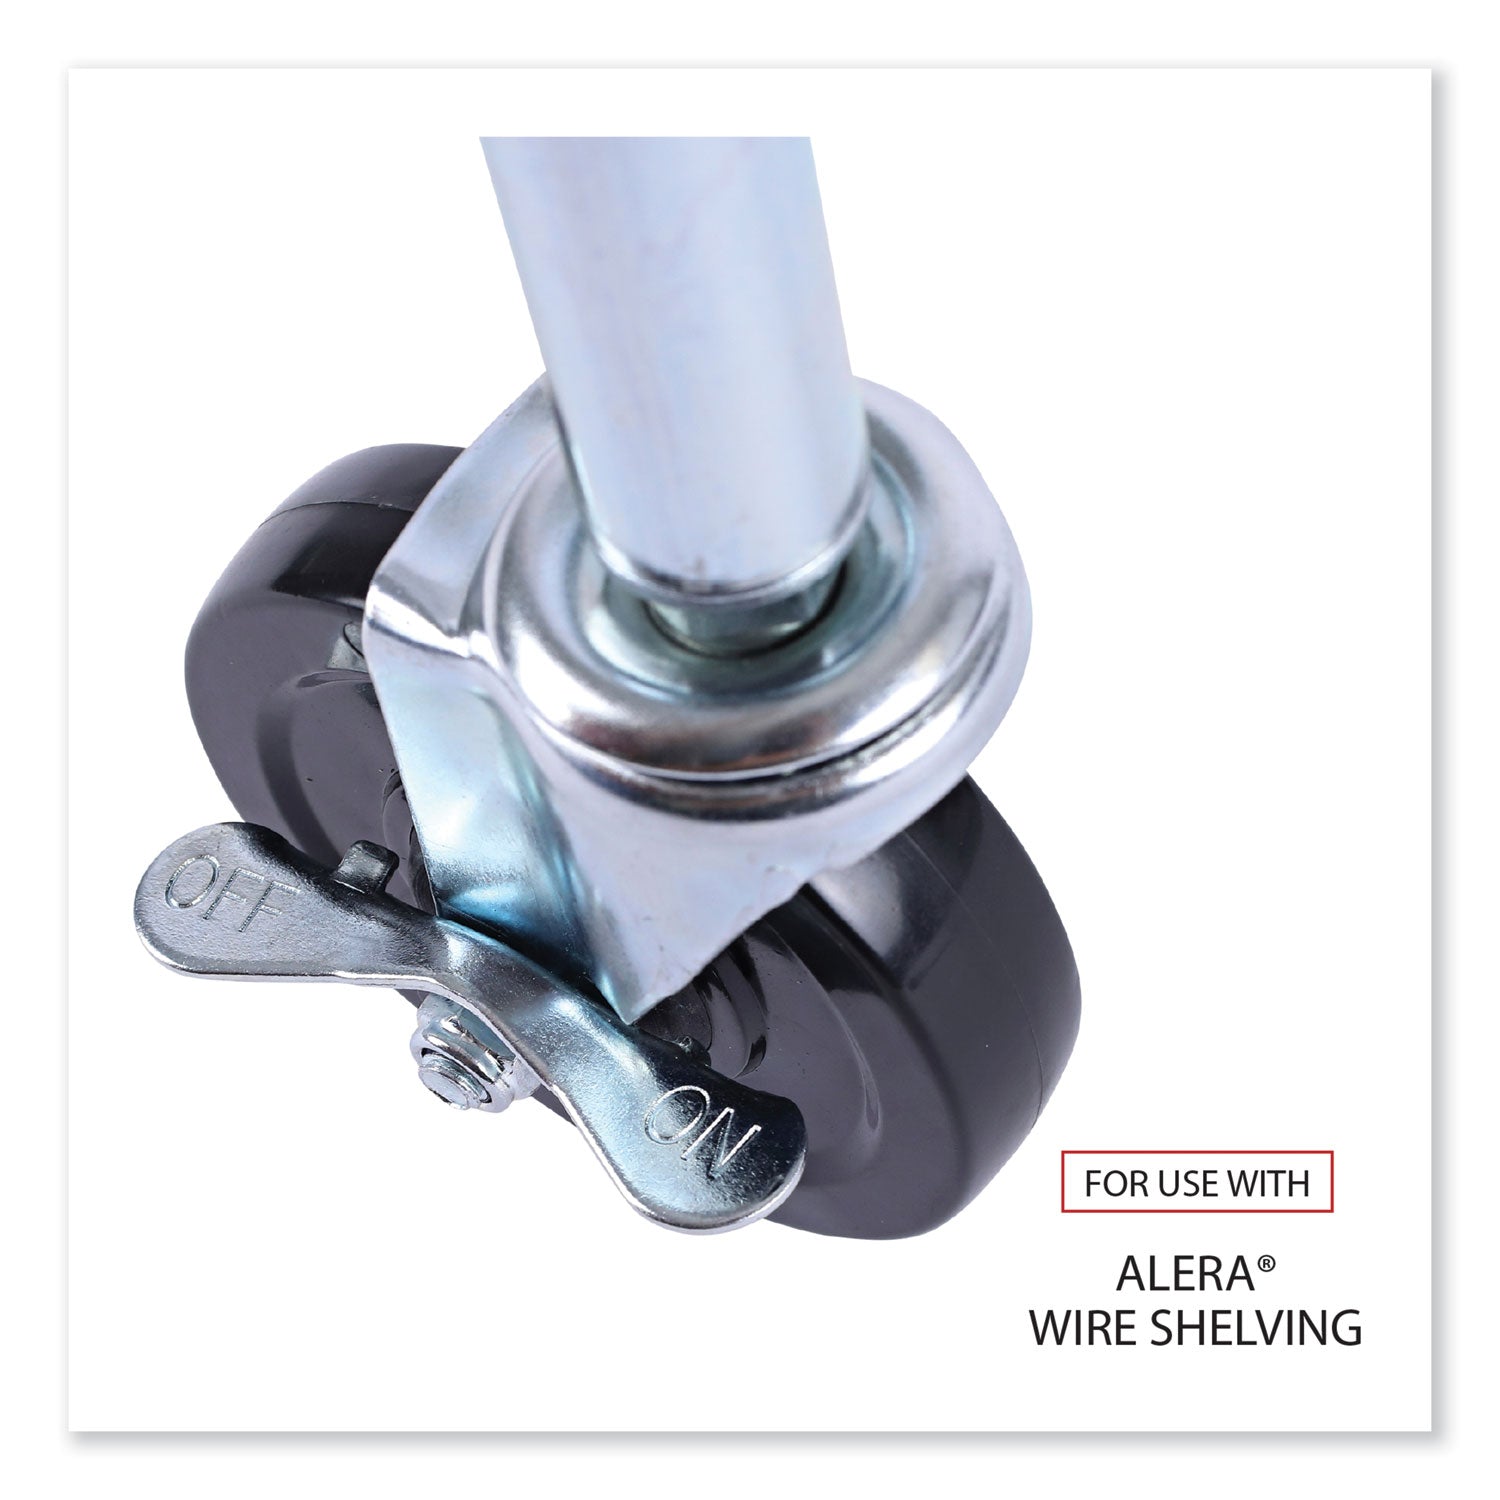 optional-casters-for-wire-shelving-grip-ring-type-k-stem-4-wheel-black-silver-4-set-2-locking_alesw690004 - 4